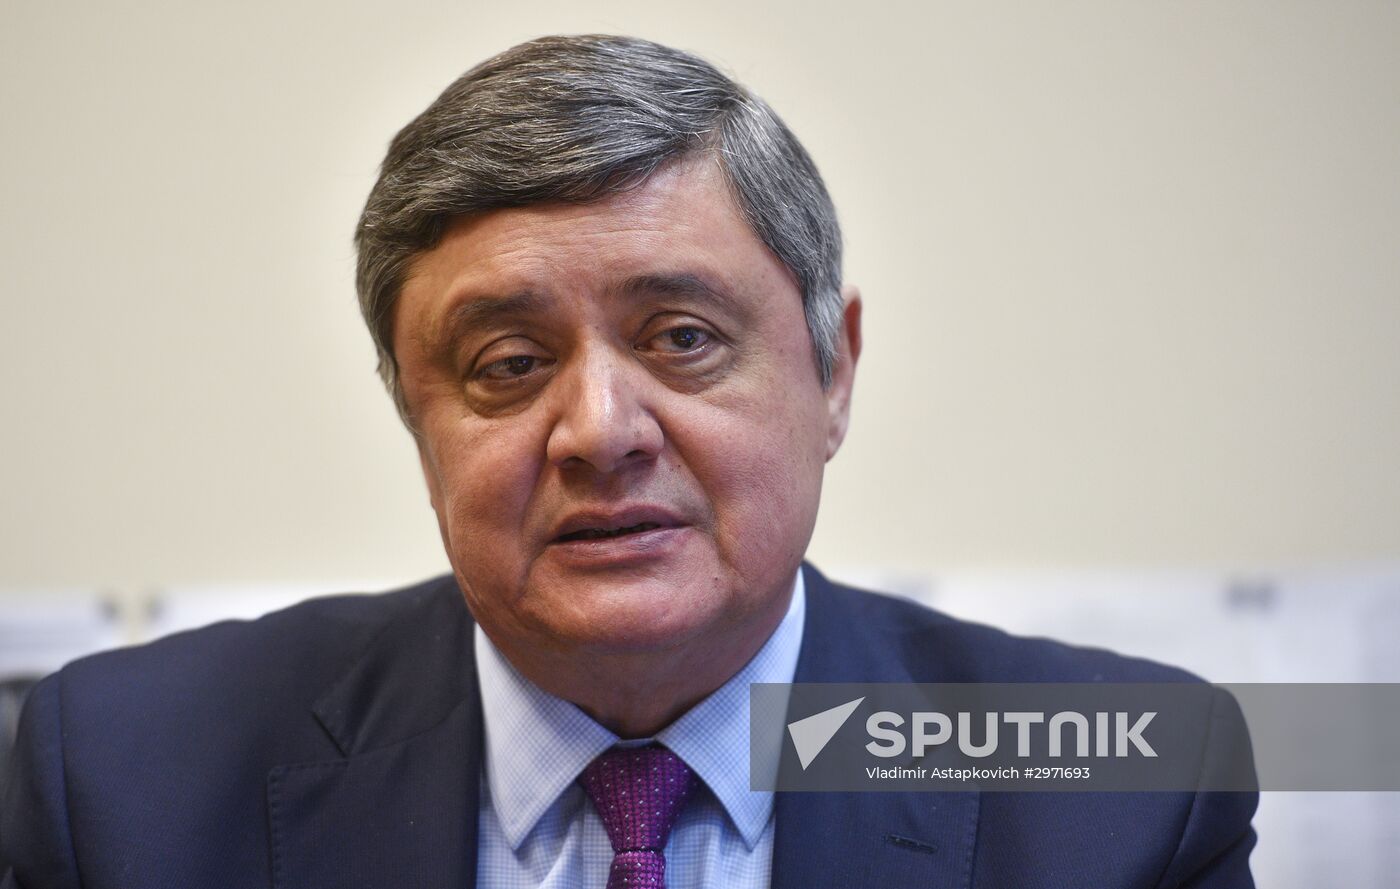 Interview with Russian Presidential Envoy to Afghanistan Zamir Kabulov